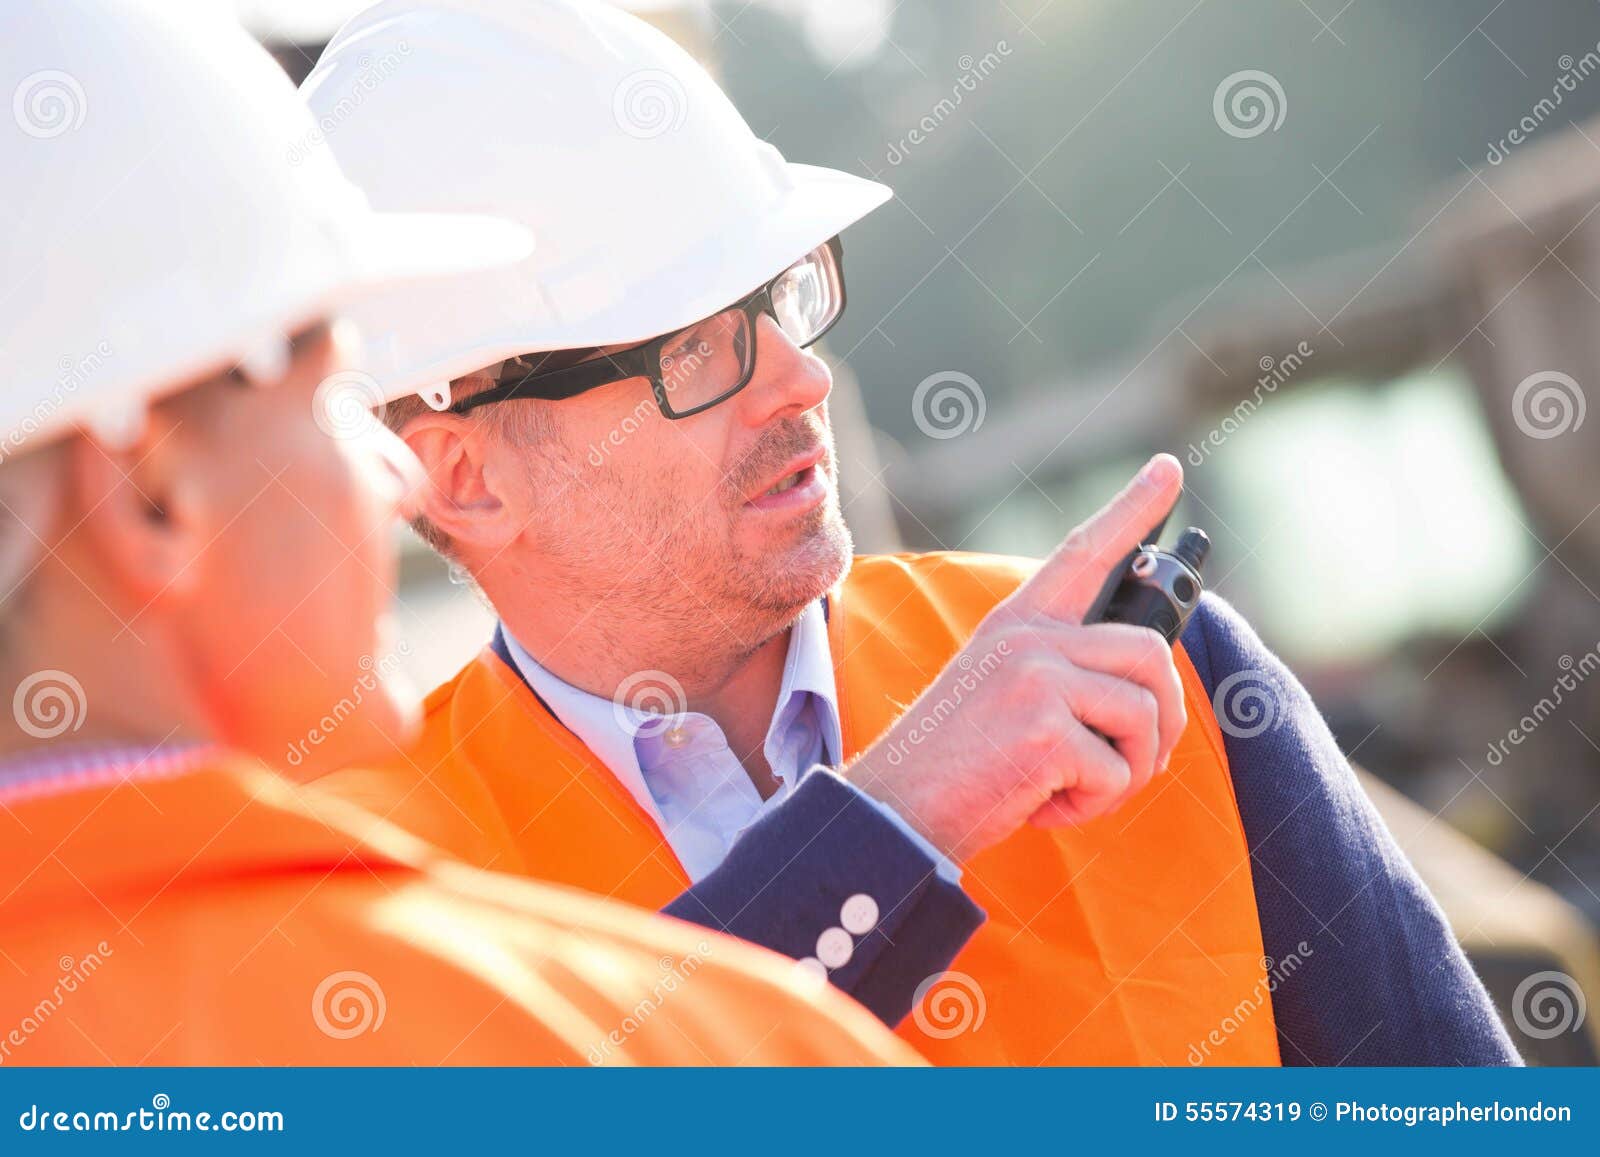 supervisor showing something to colleague at construction site